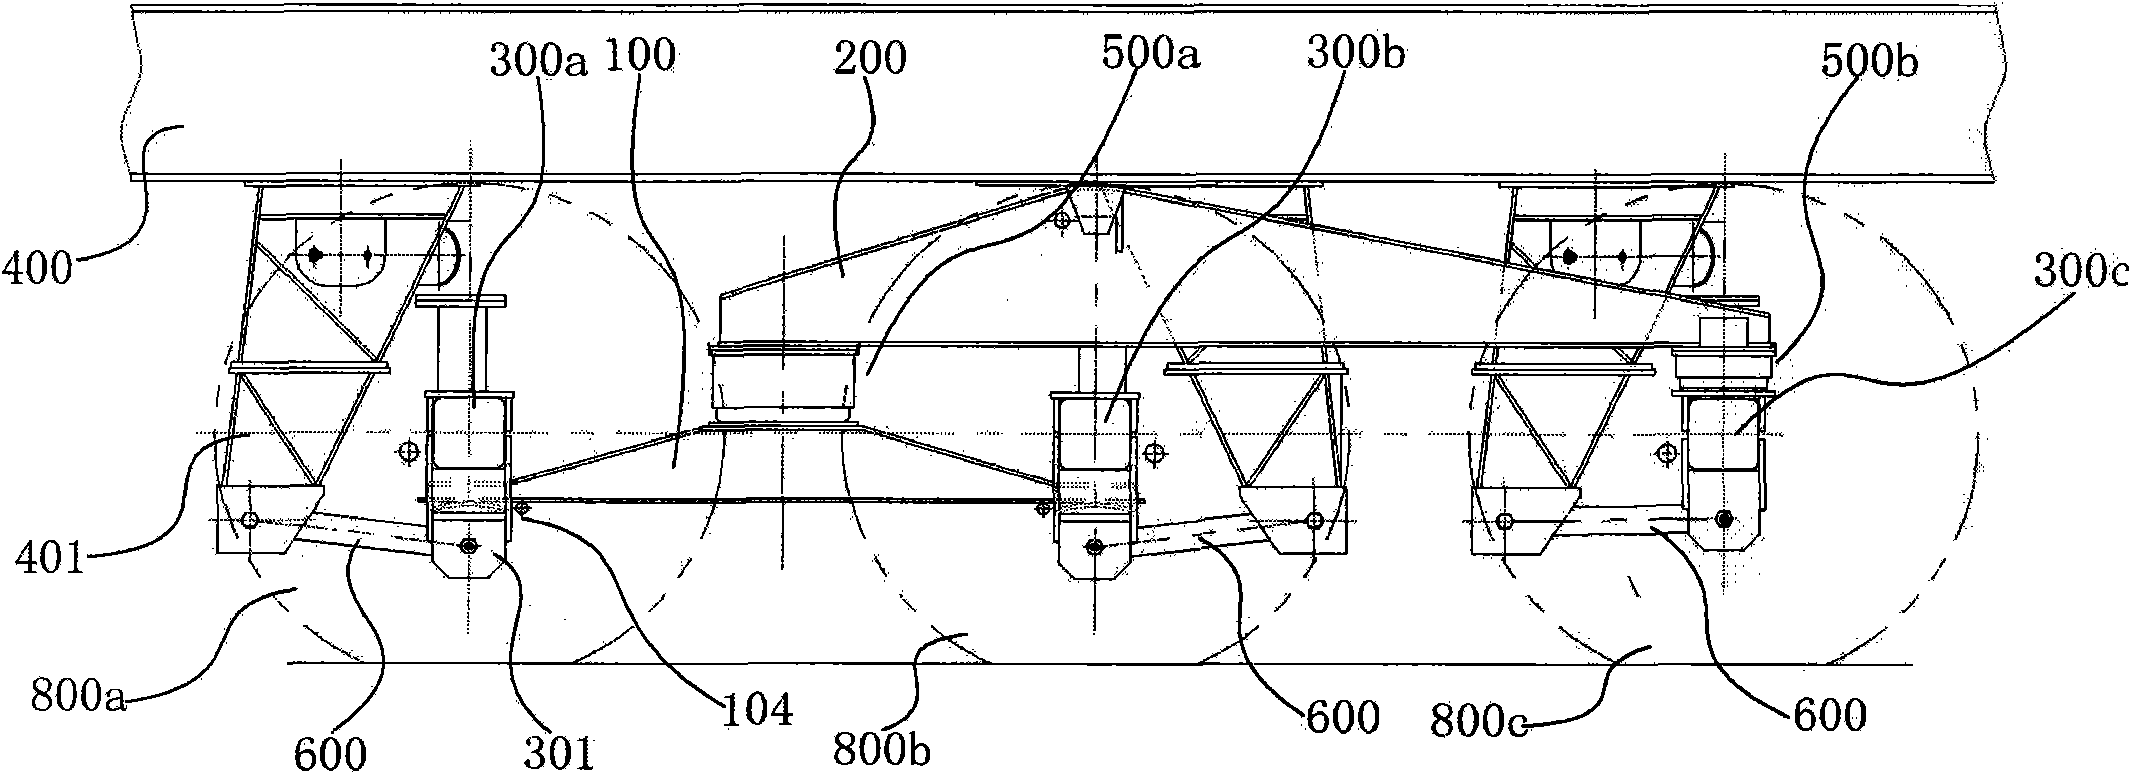 Three-axle linked suspension system